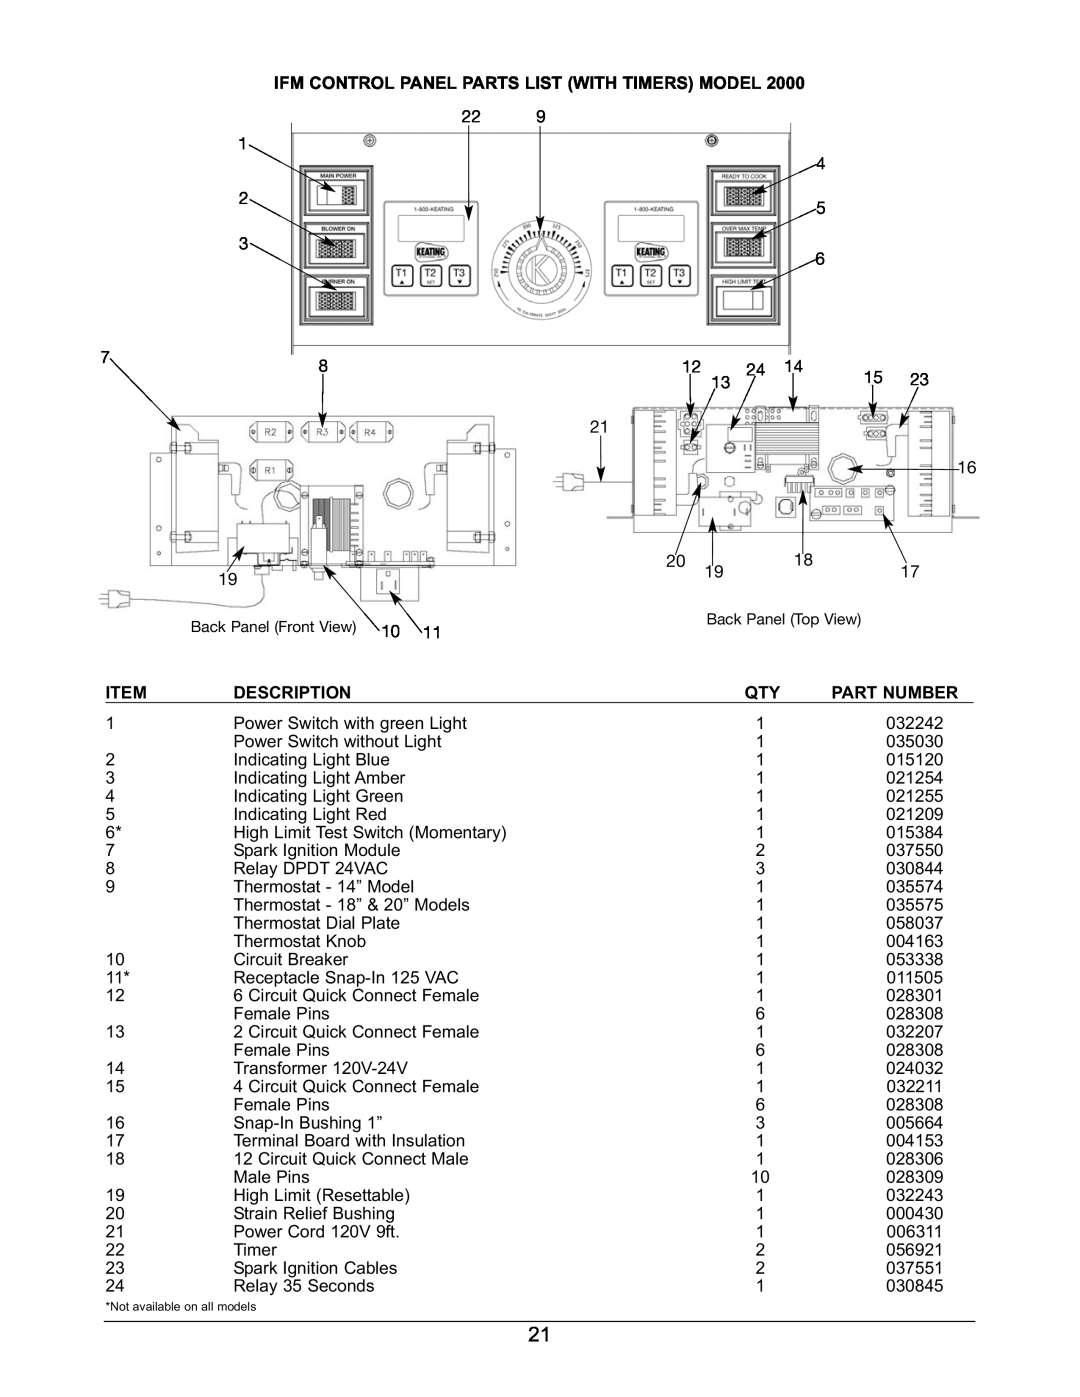 Keating Of Chicago 2006 warranty Ifm Control Panel Parts List With Timers Model, Description, Part Number 